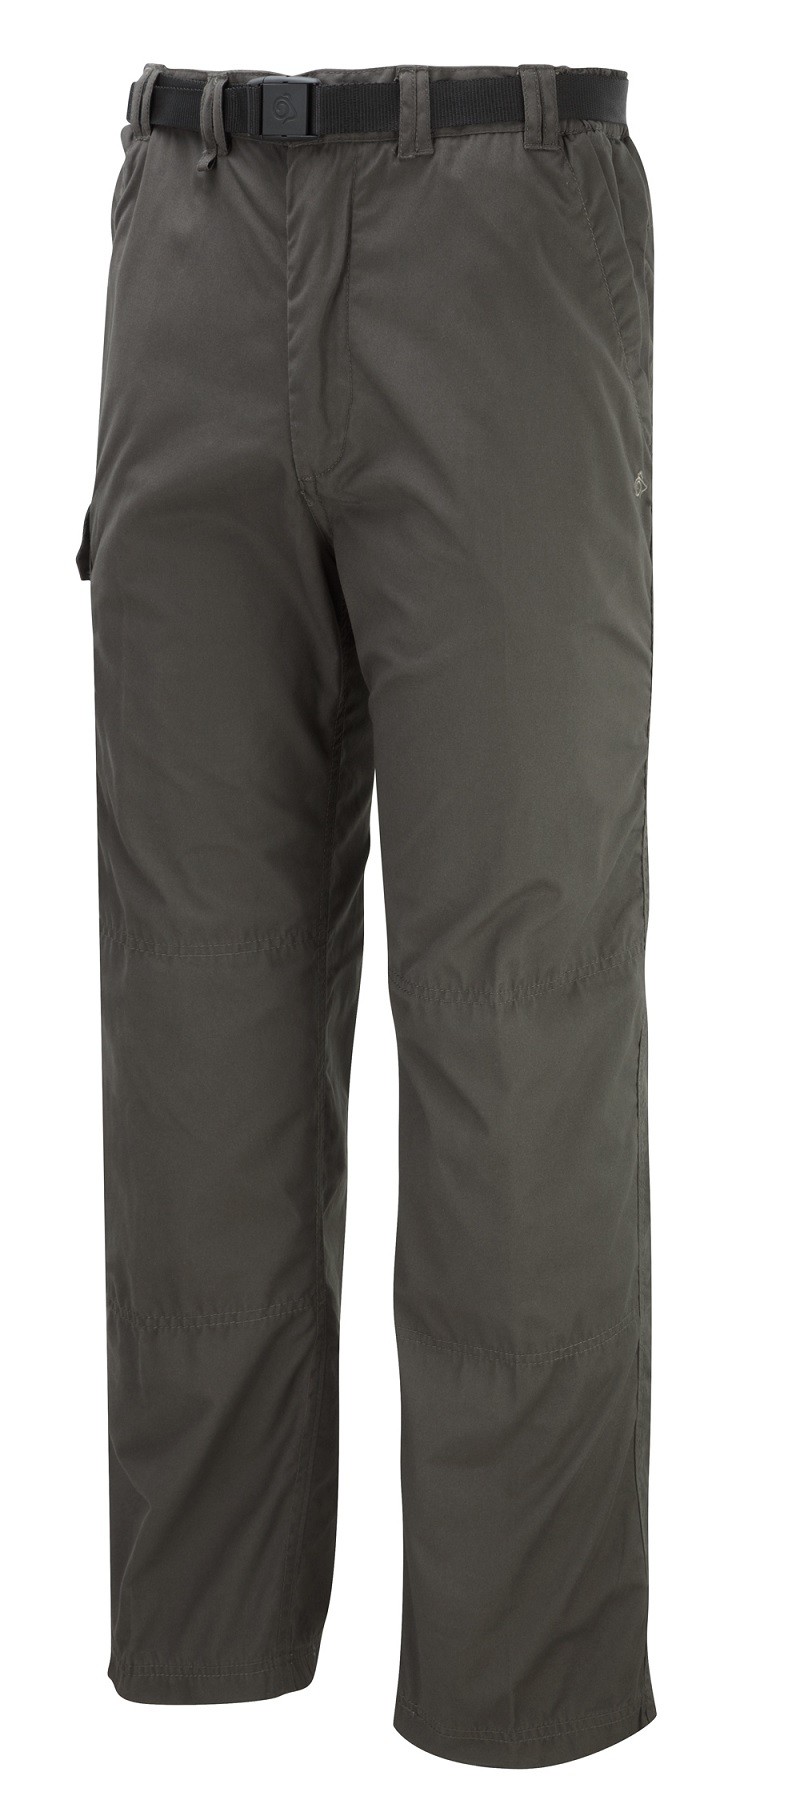 Craghoppers Men's Classic Kiwi Trousers from Craghoppers for £40.00